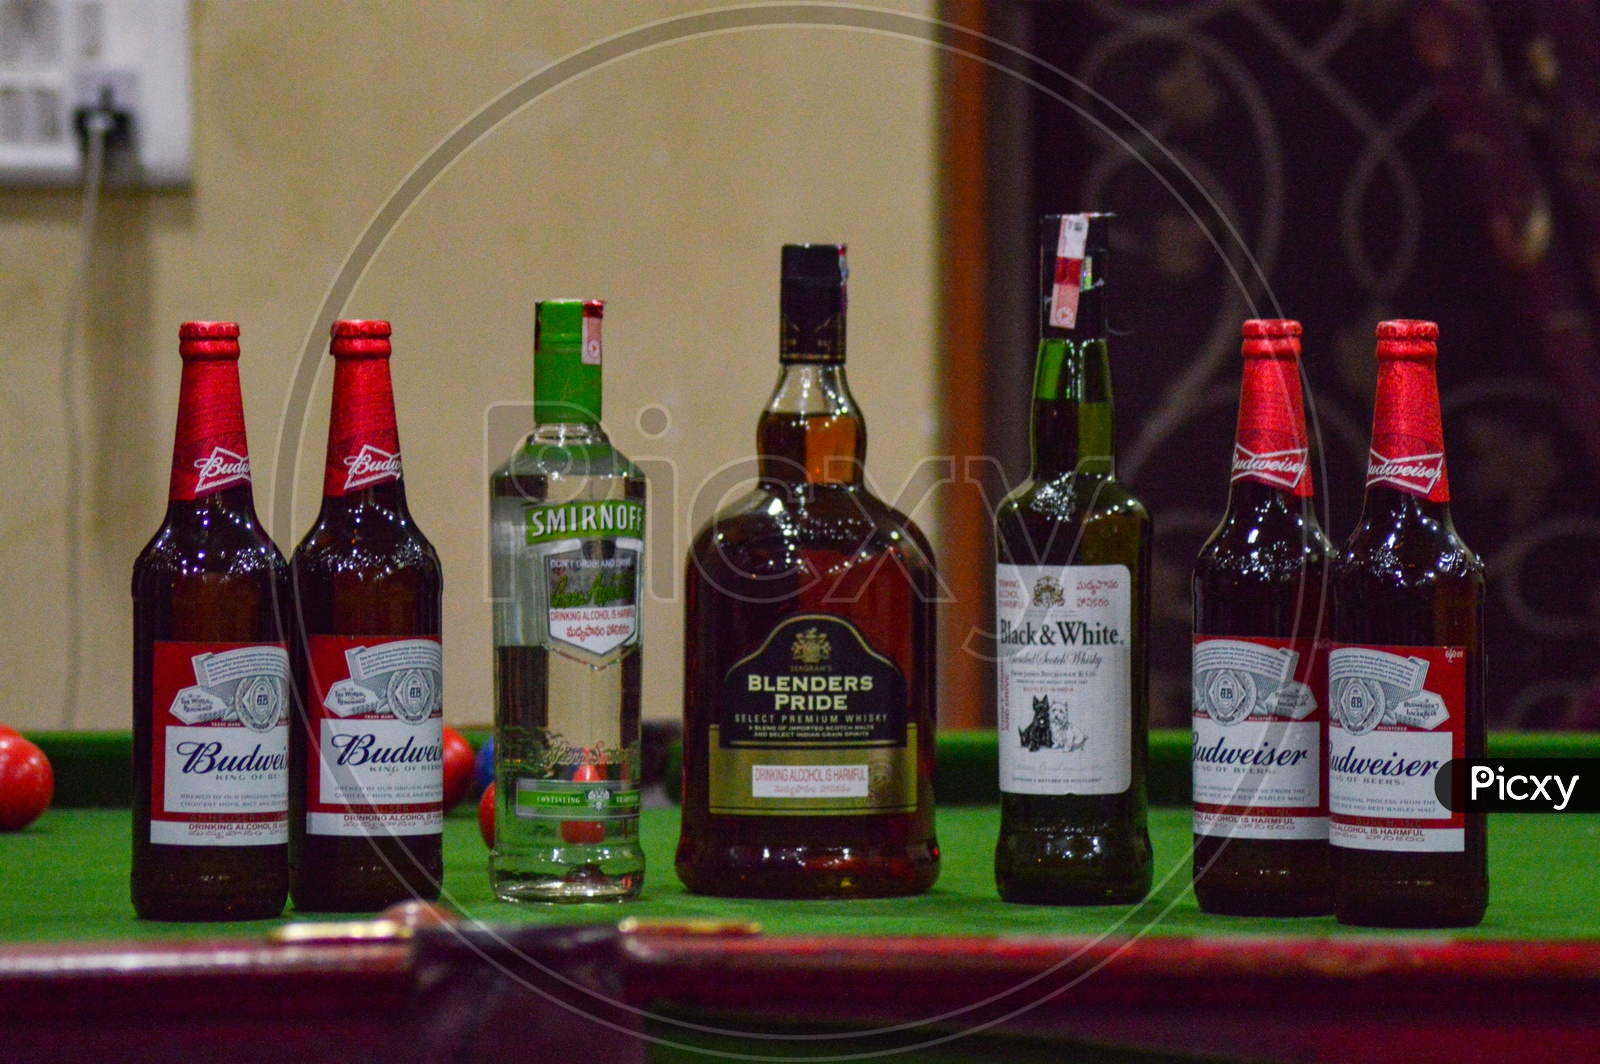 A display of various alcoholic beverages like Smirnoff, Blenders Pride, Budweiser and Black & White on a Pool Table